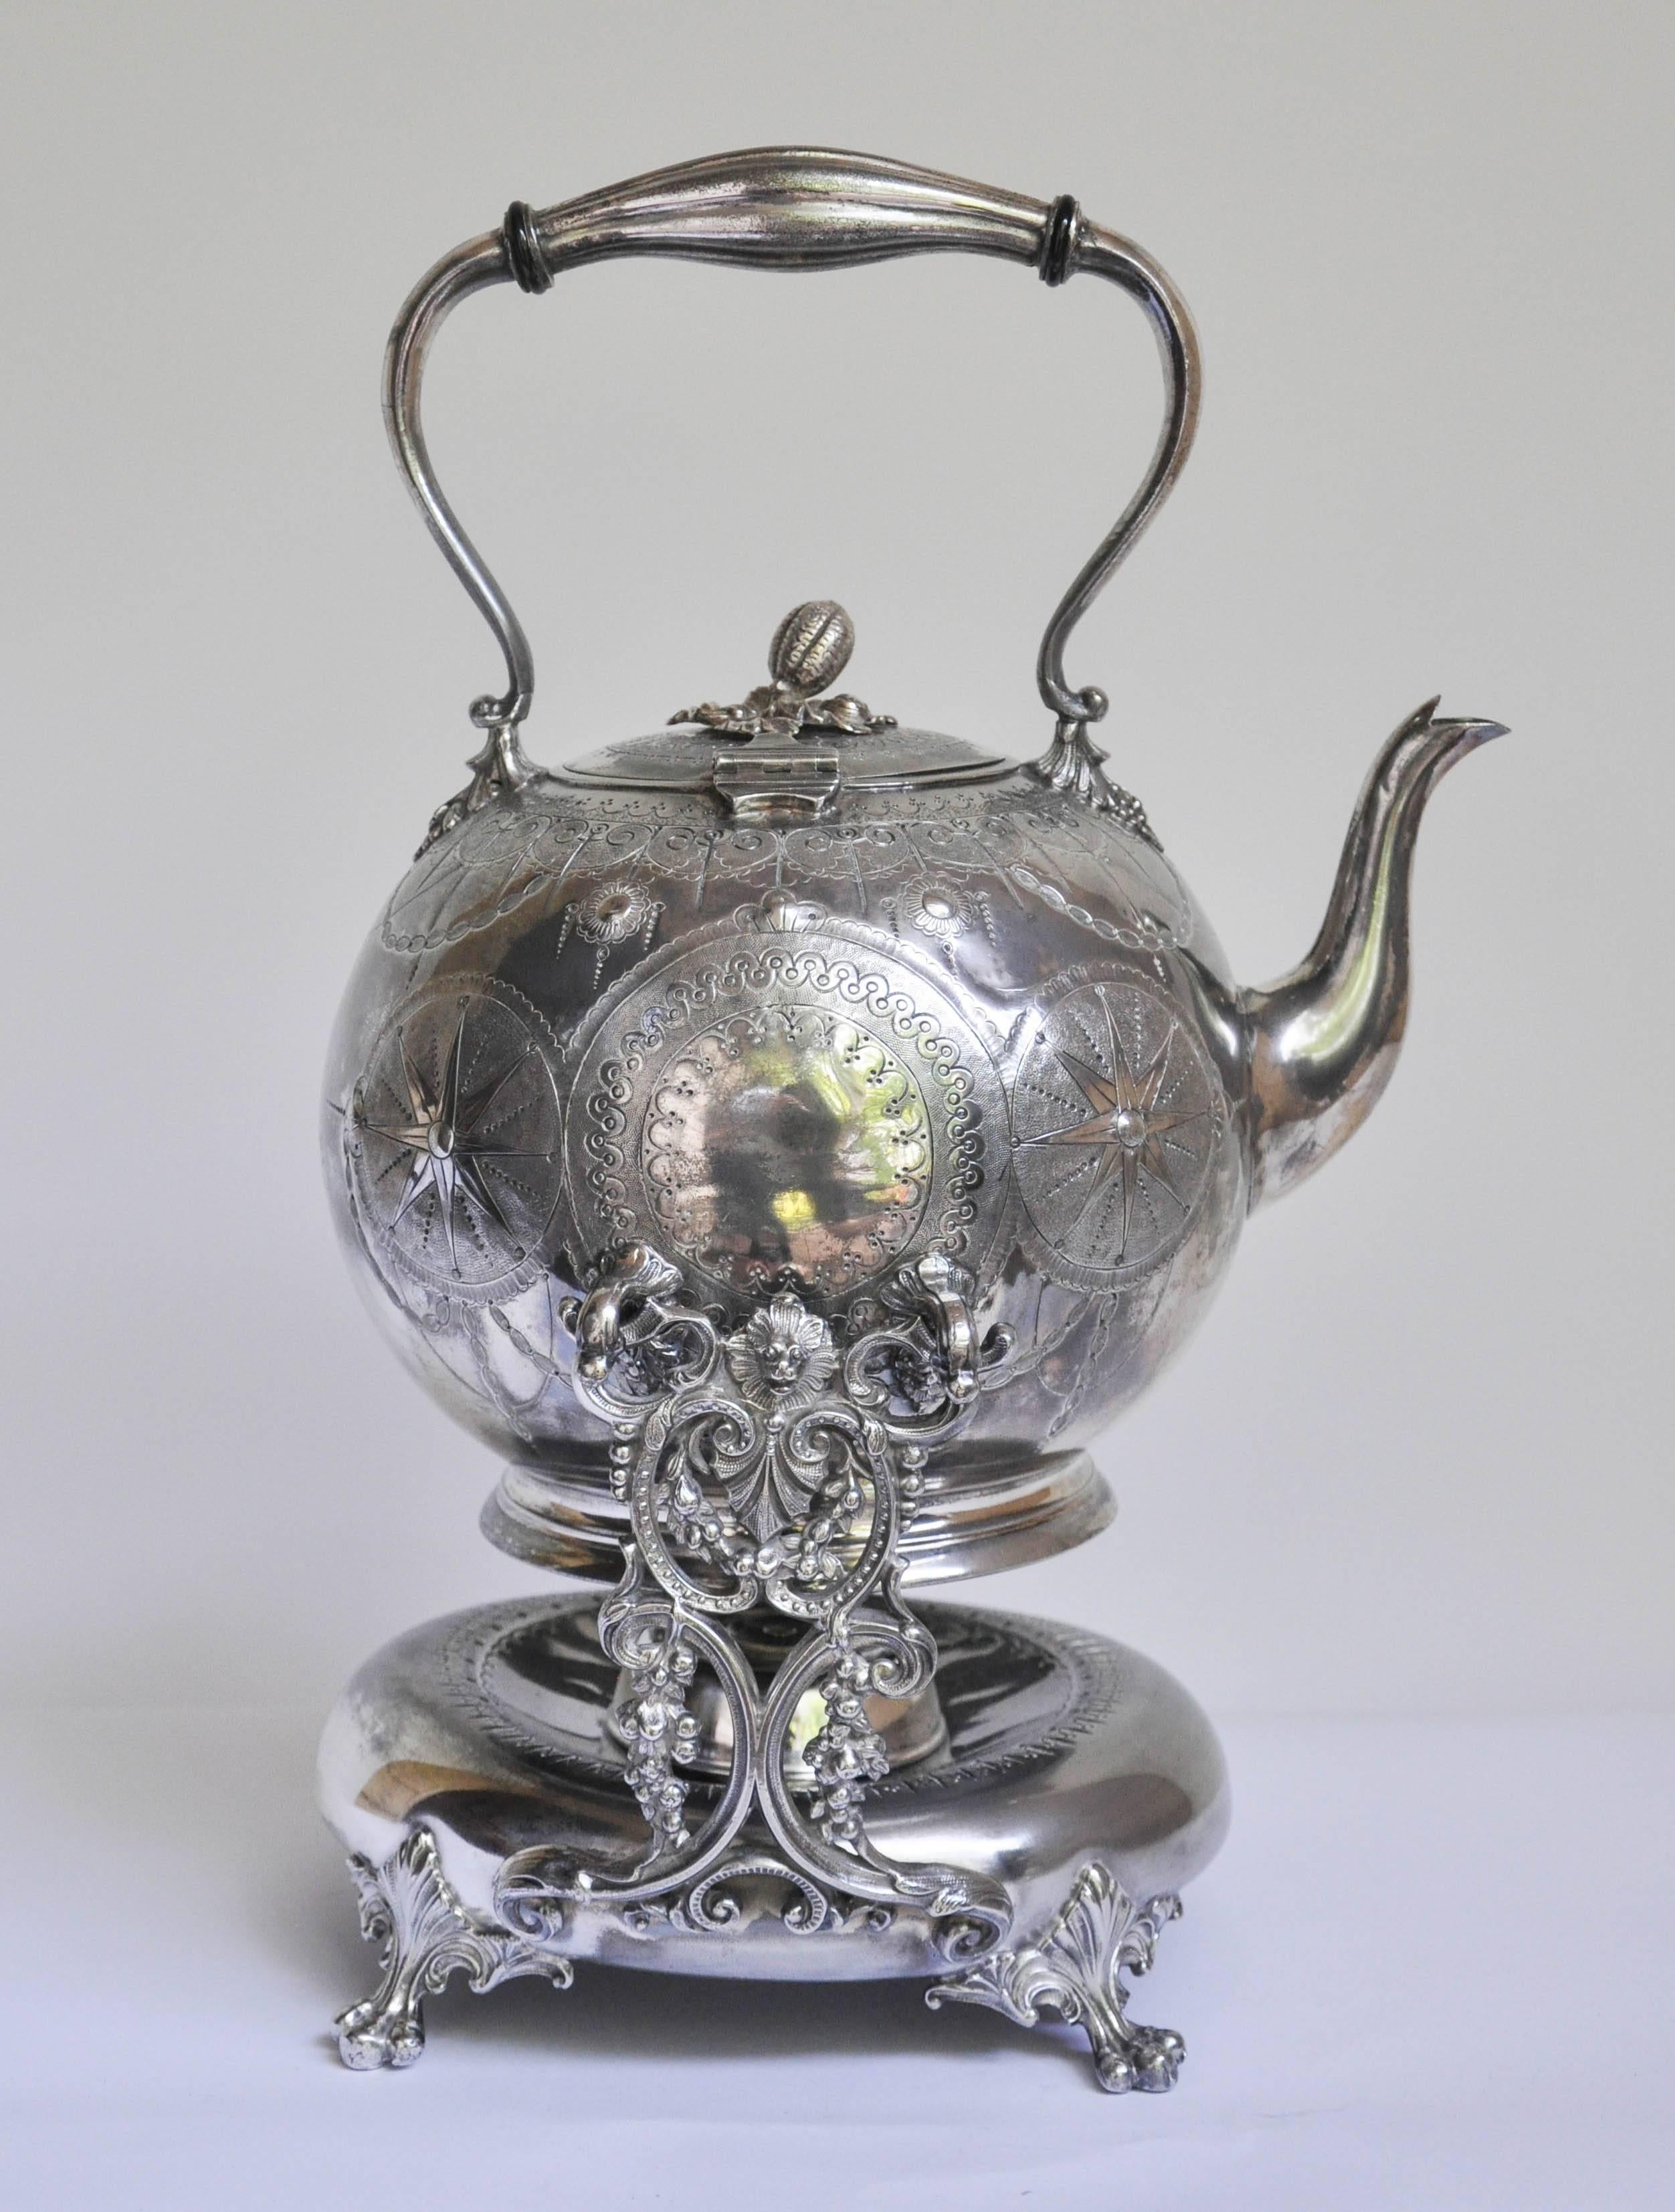 Charming English Regency style tilting tea kettle on a lamp stand. The kettle is delicately chased with a swag-like design, lovely repoussé work decorates the center of the barrel in the form of sunbursts and crests. The hinged lid has a finial